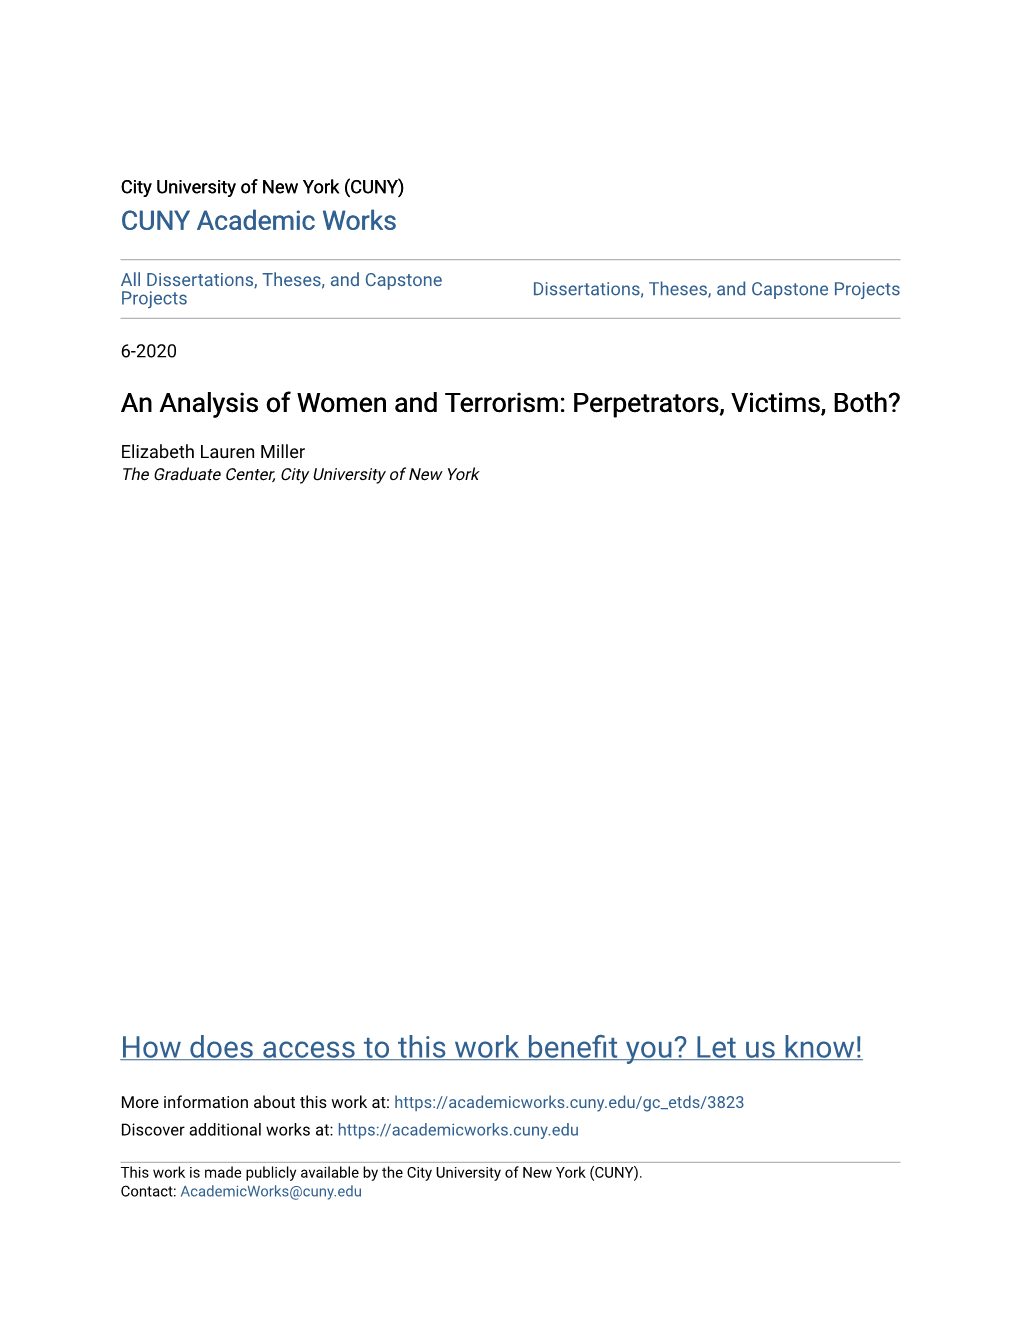 An Analysis of Women and Terrorism: Perpetrators, Victims, Both?